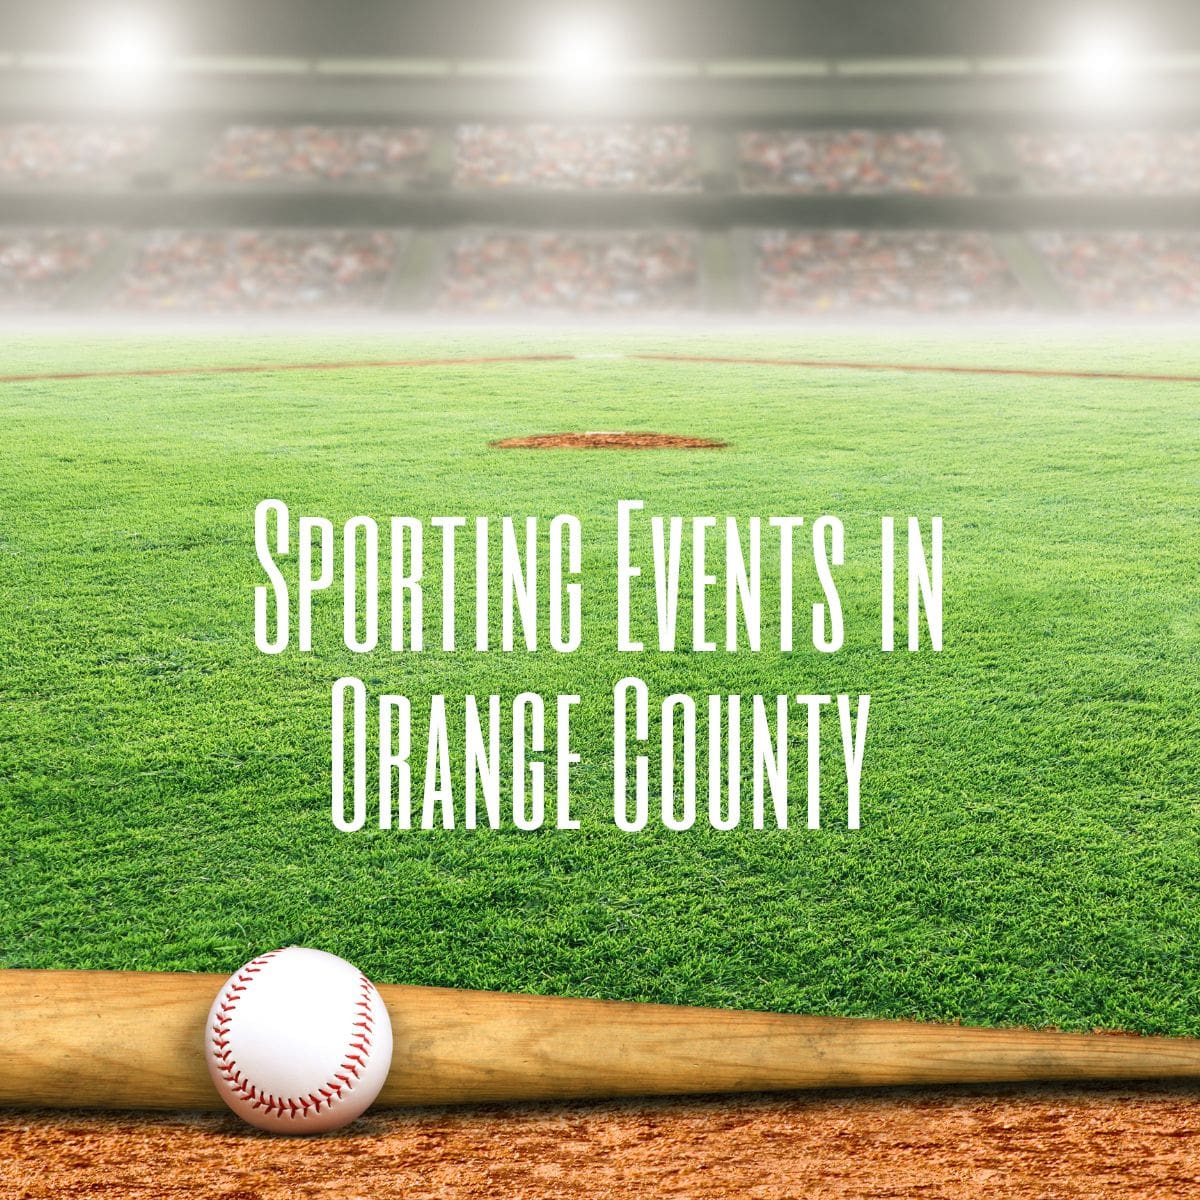 Sporting Events In Orange County